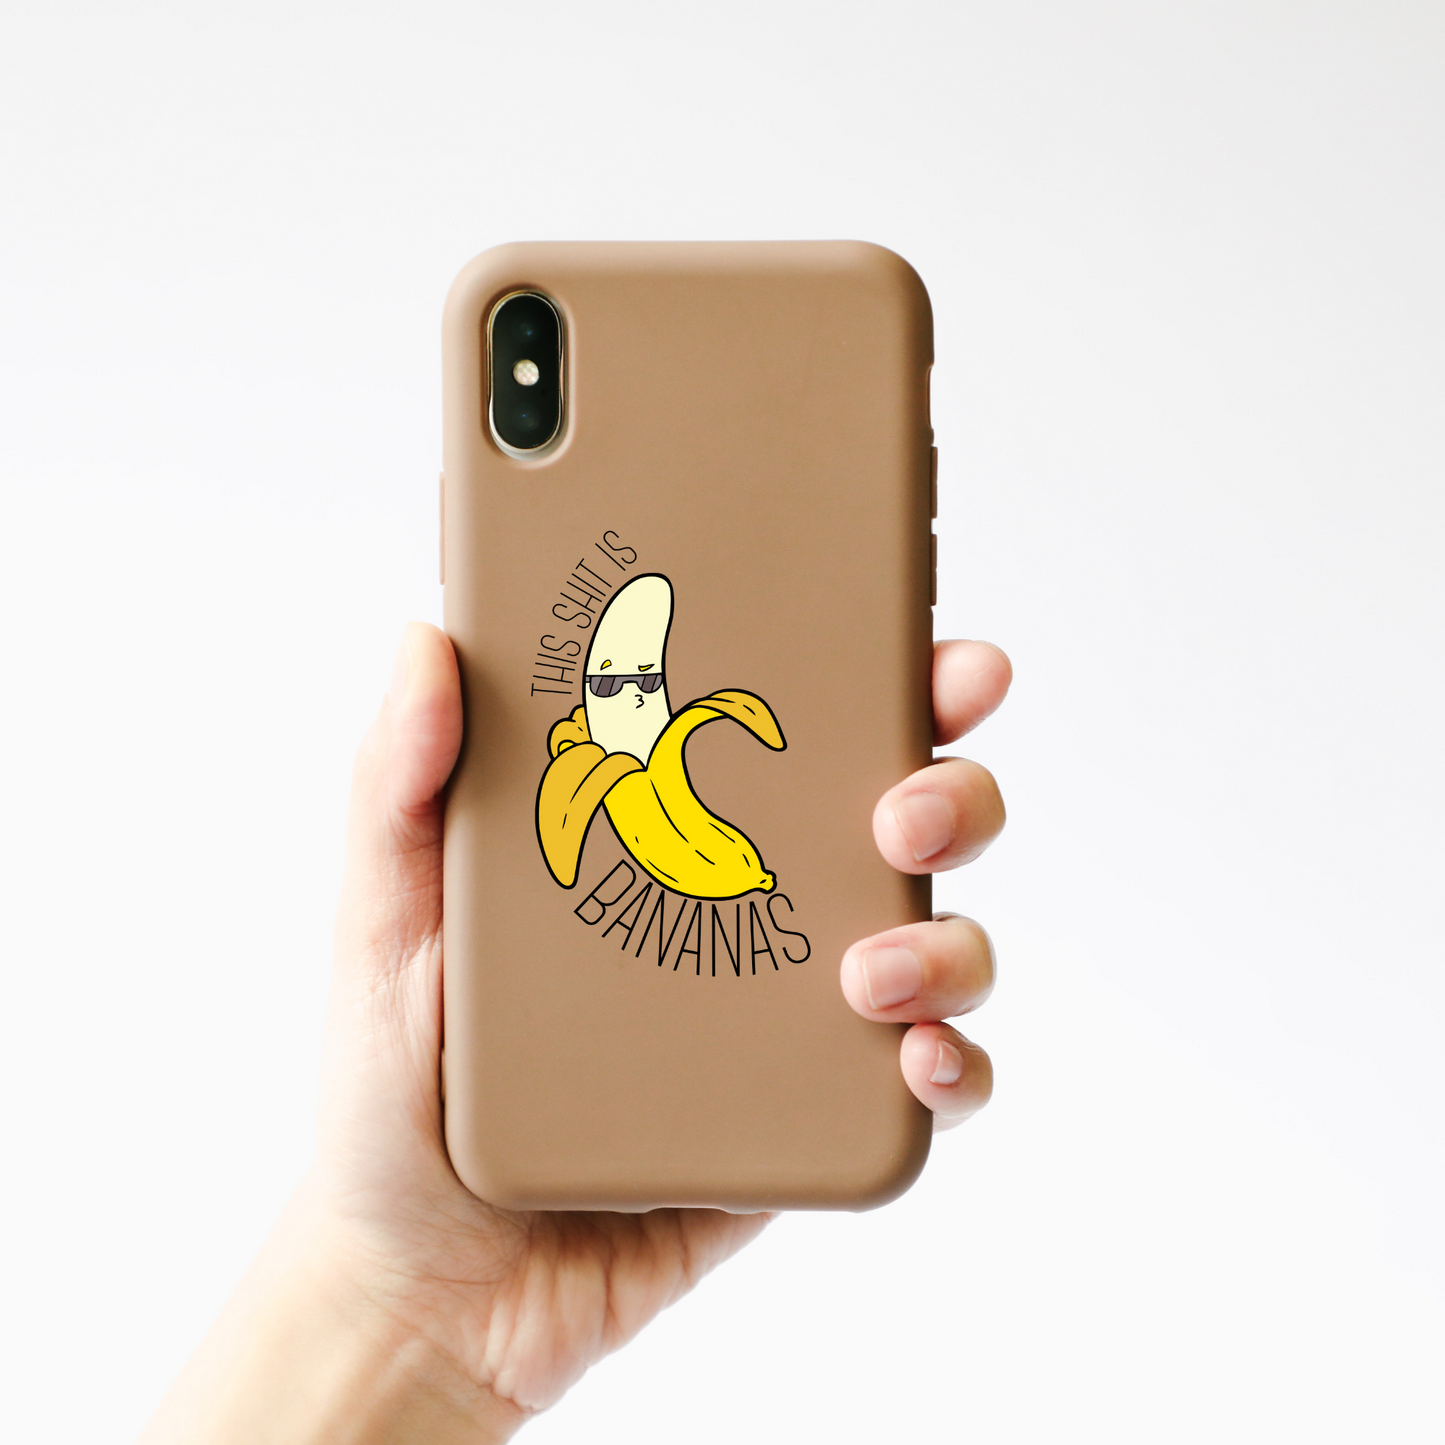 83. This S*** is Bananas UV DTF Decal 3"